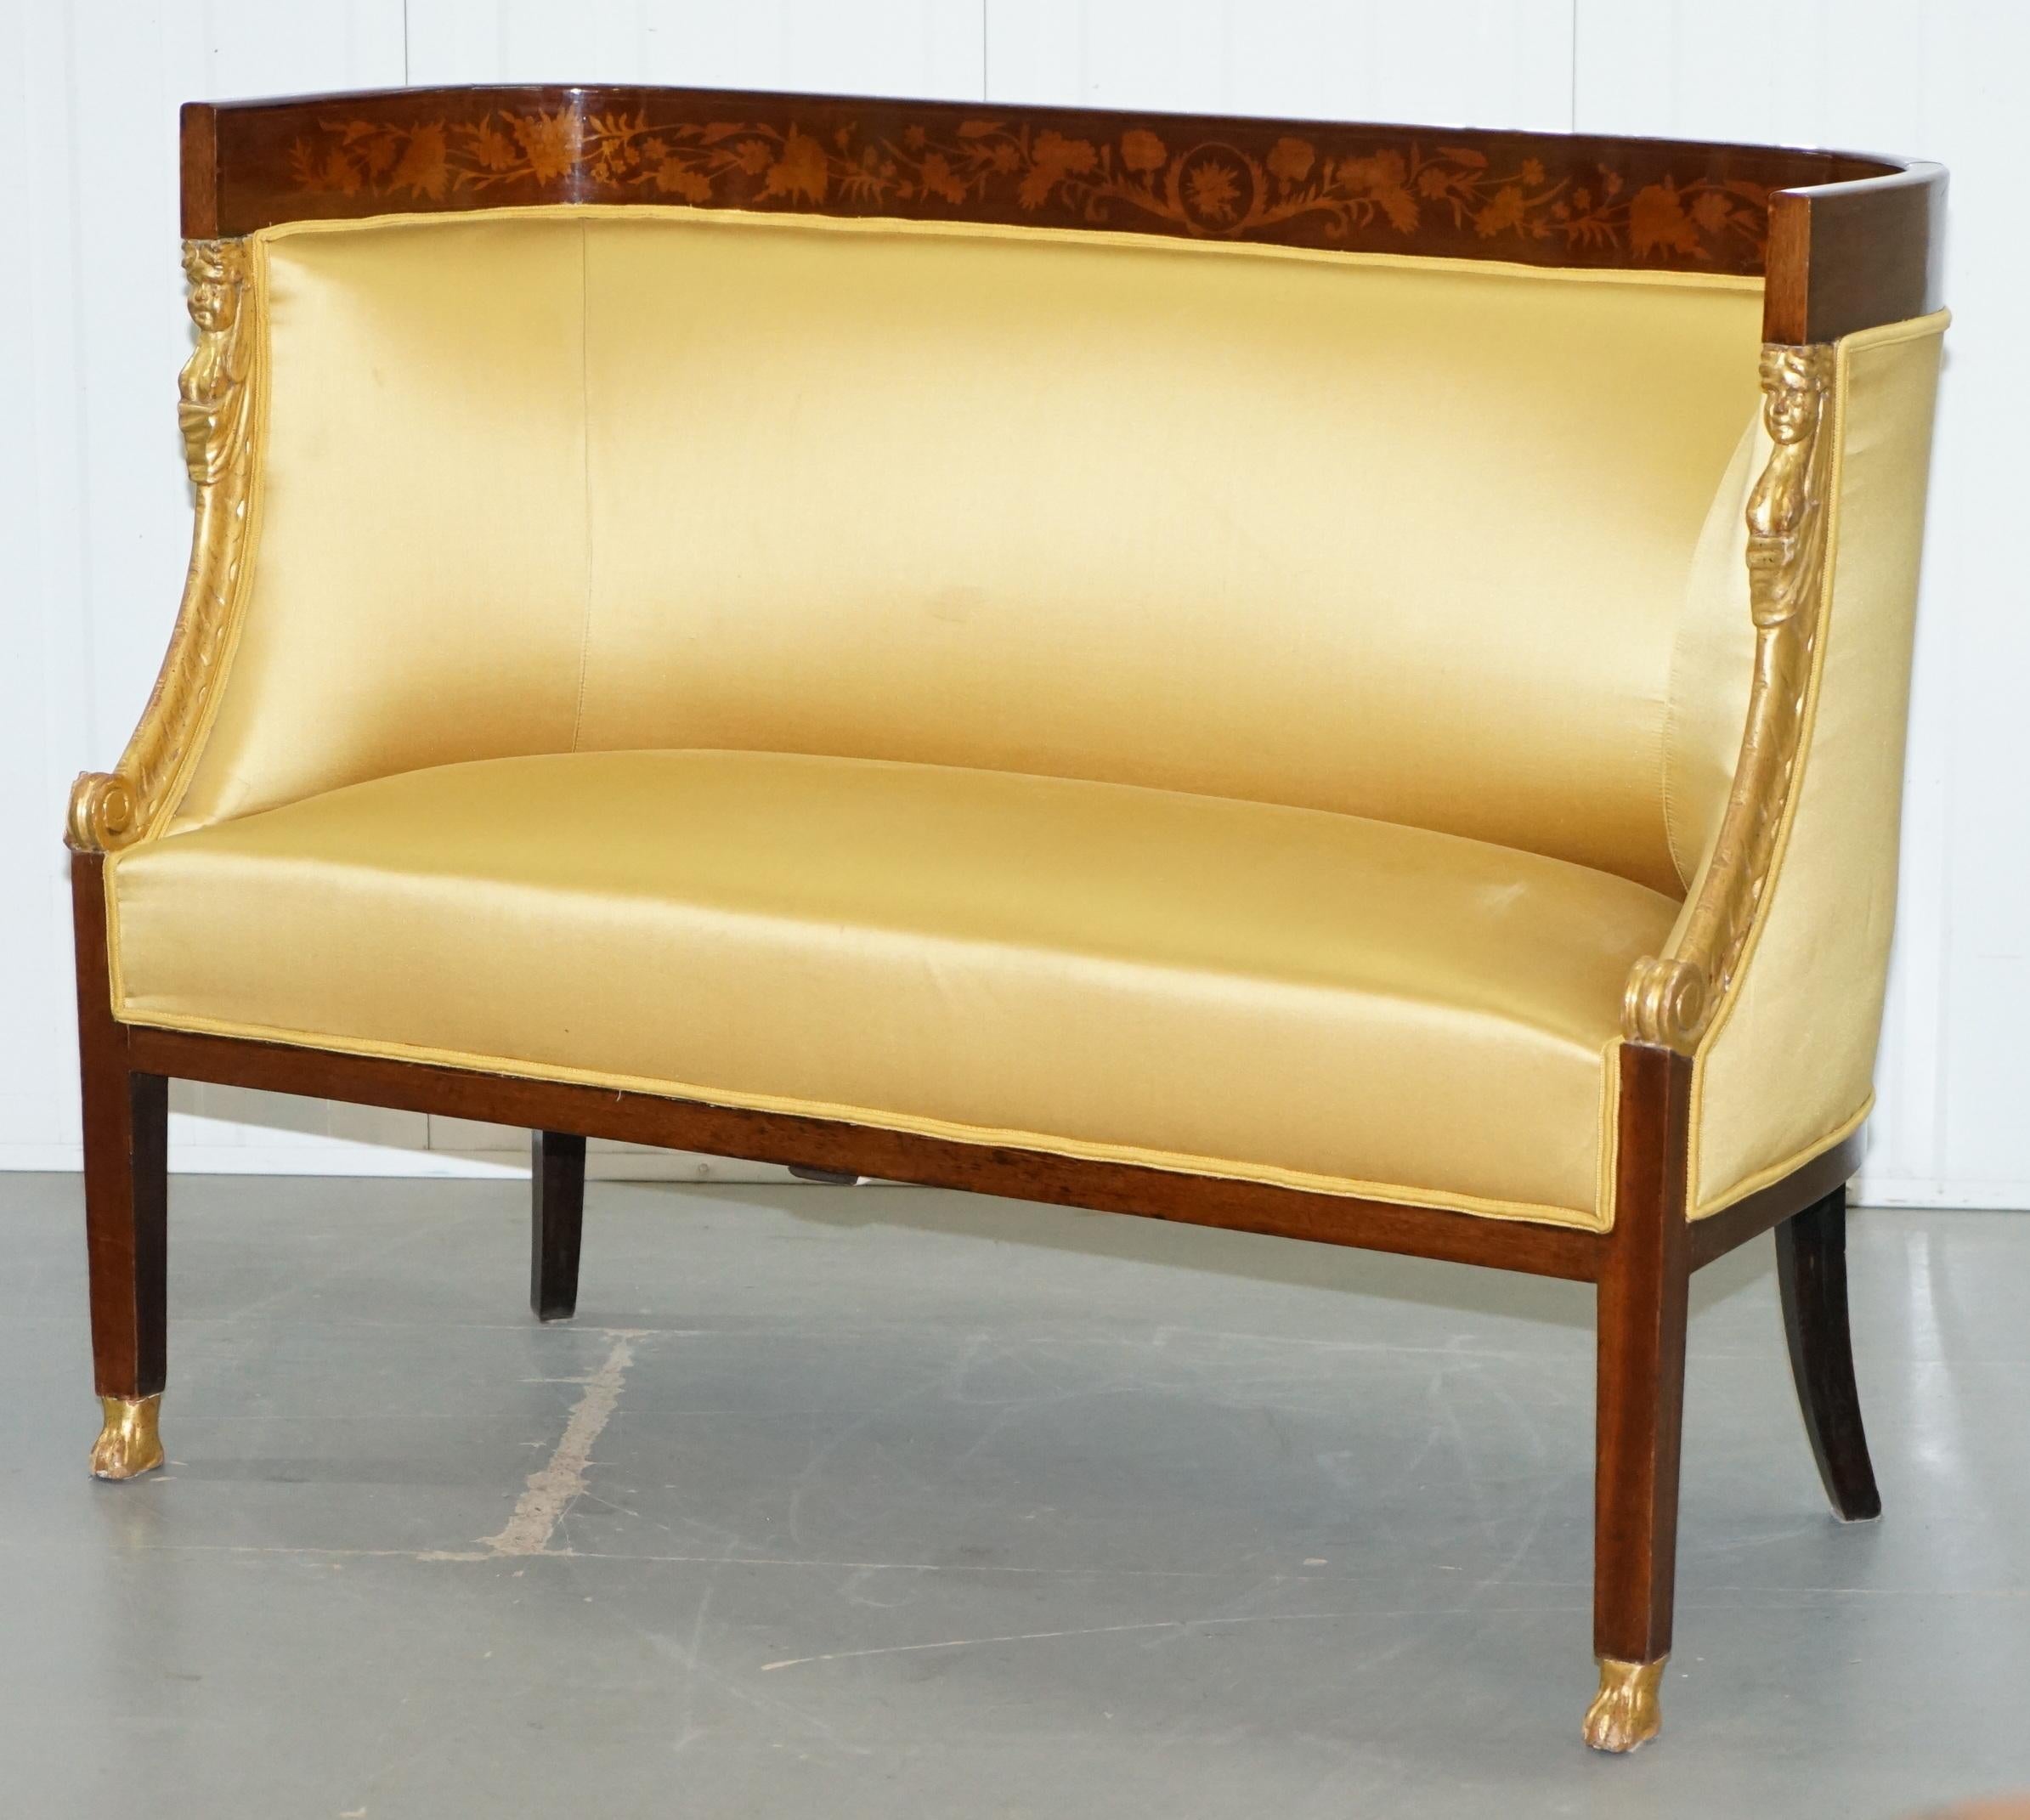 1870 French Empire Marquetry Inlaid Suite Berger Armchairs & Settee Canape, Pair For Sale 12